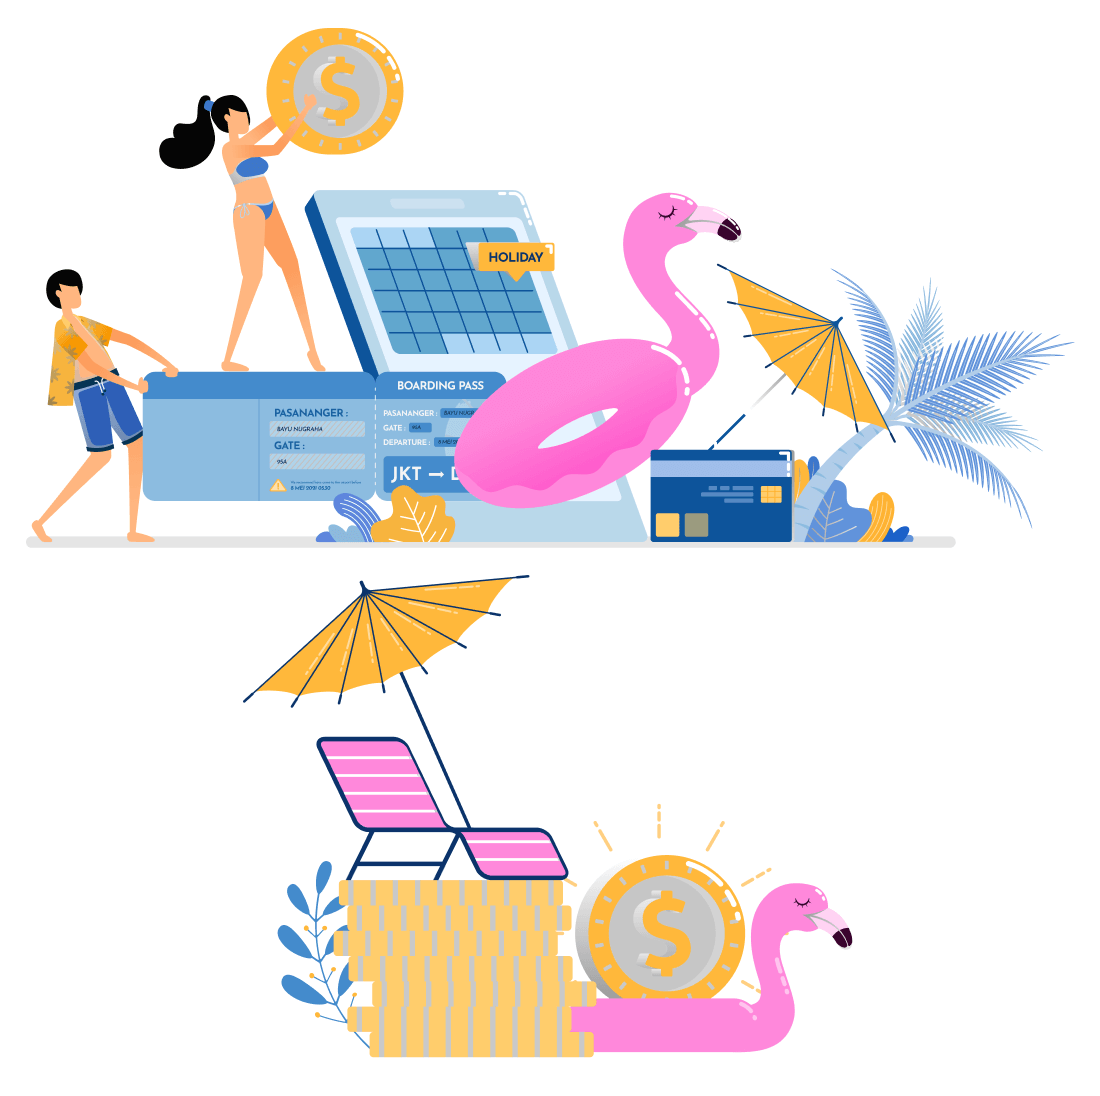 Travel fund for a vacation abroad, beach umbrellas and a pink flamingo.